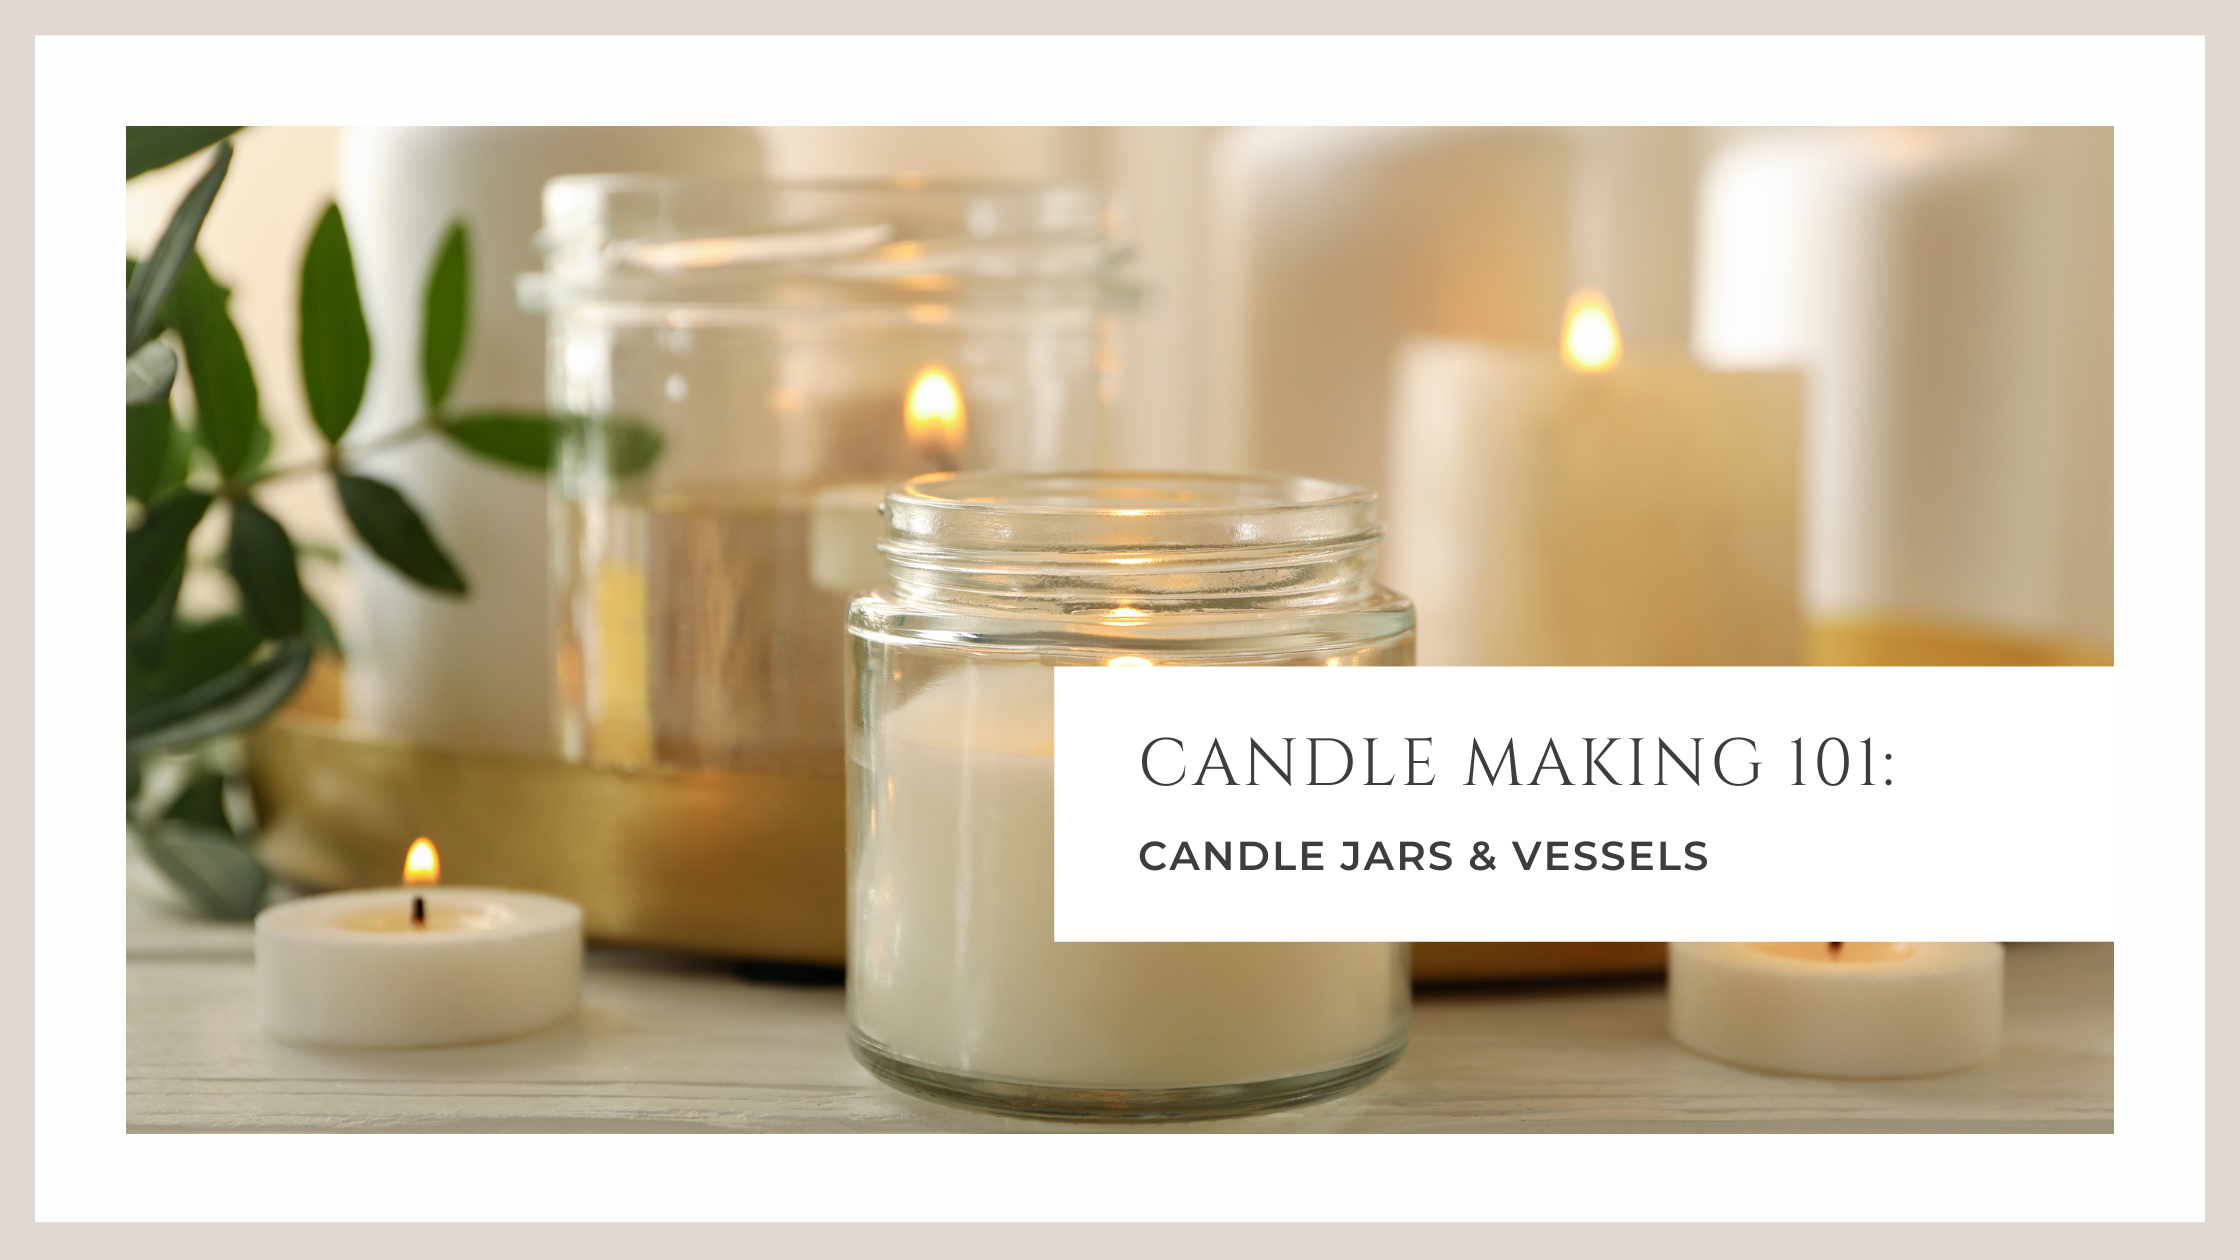 Candlemaking 101: it's easier than you might think!